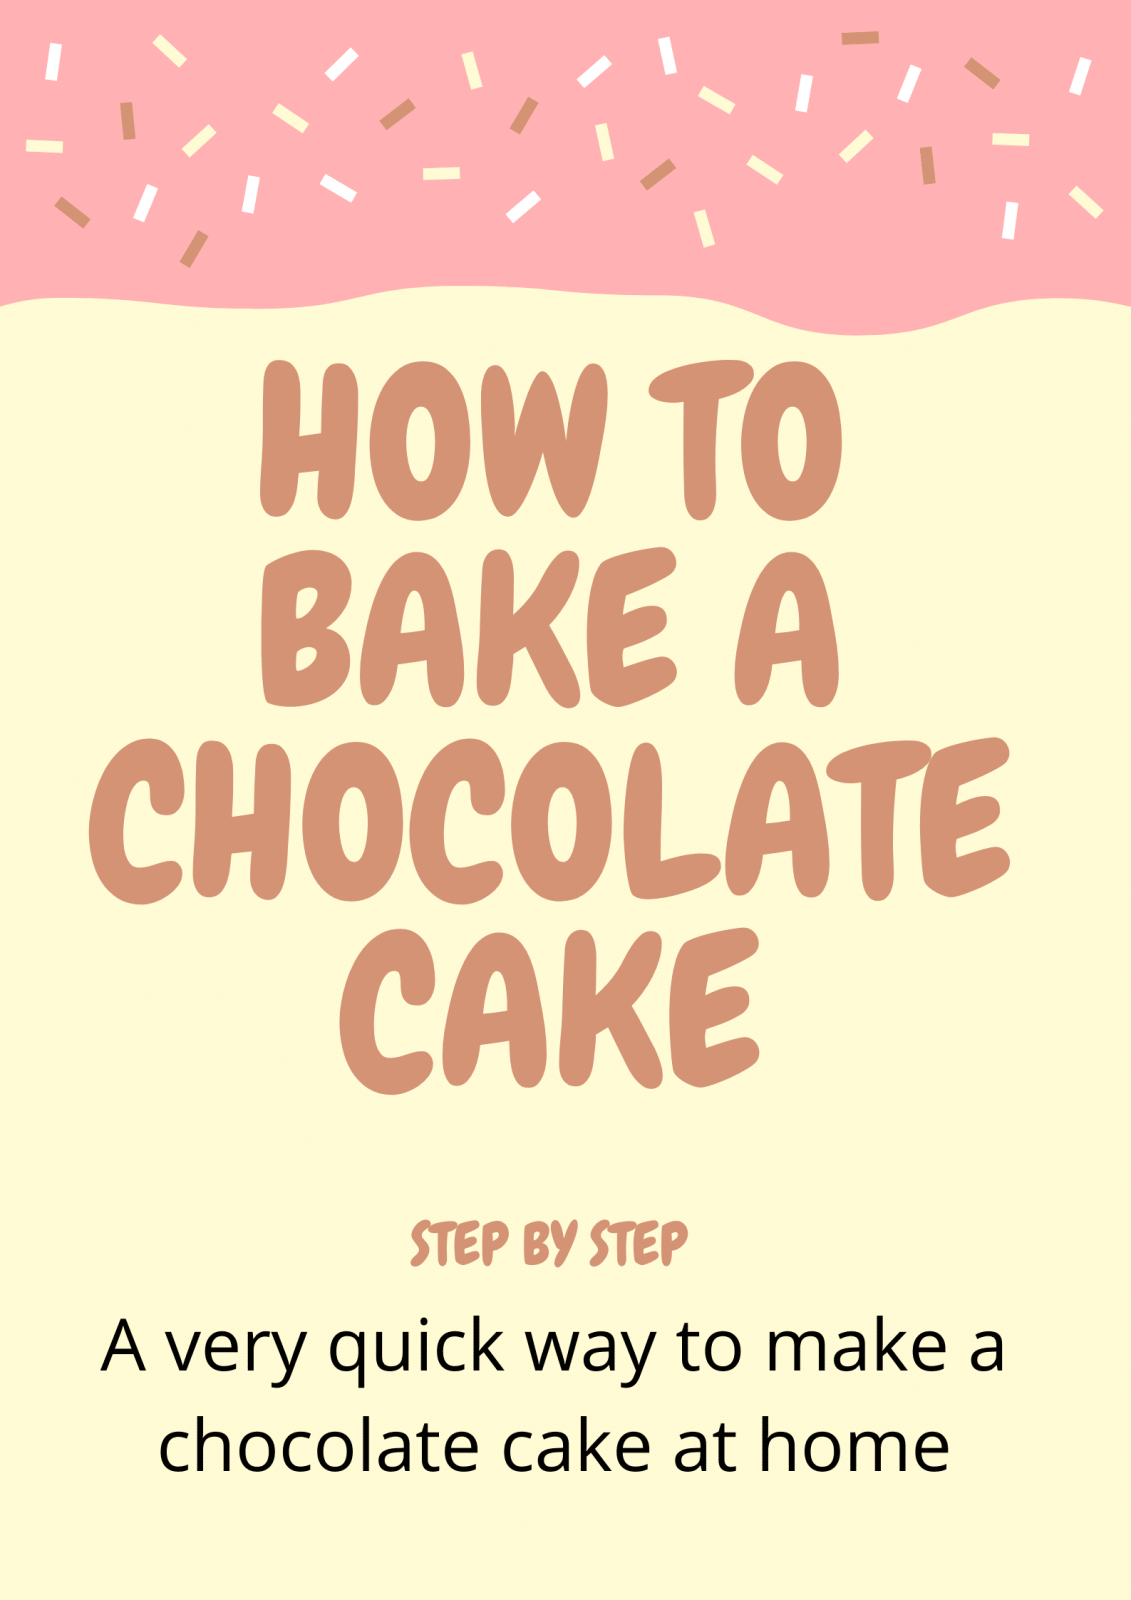 How to bake a chocolate cake step by step